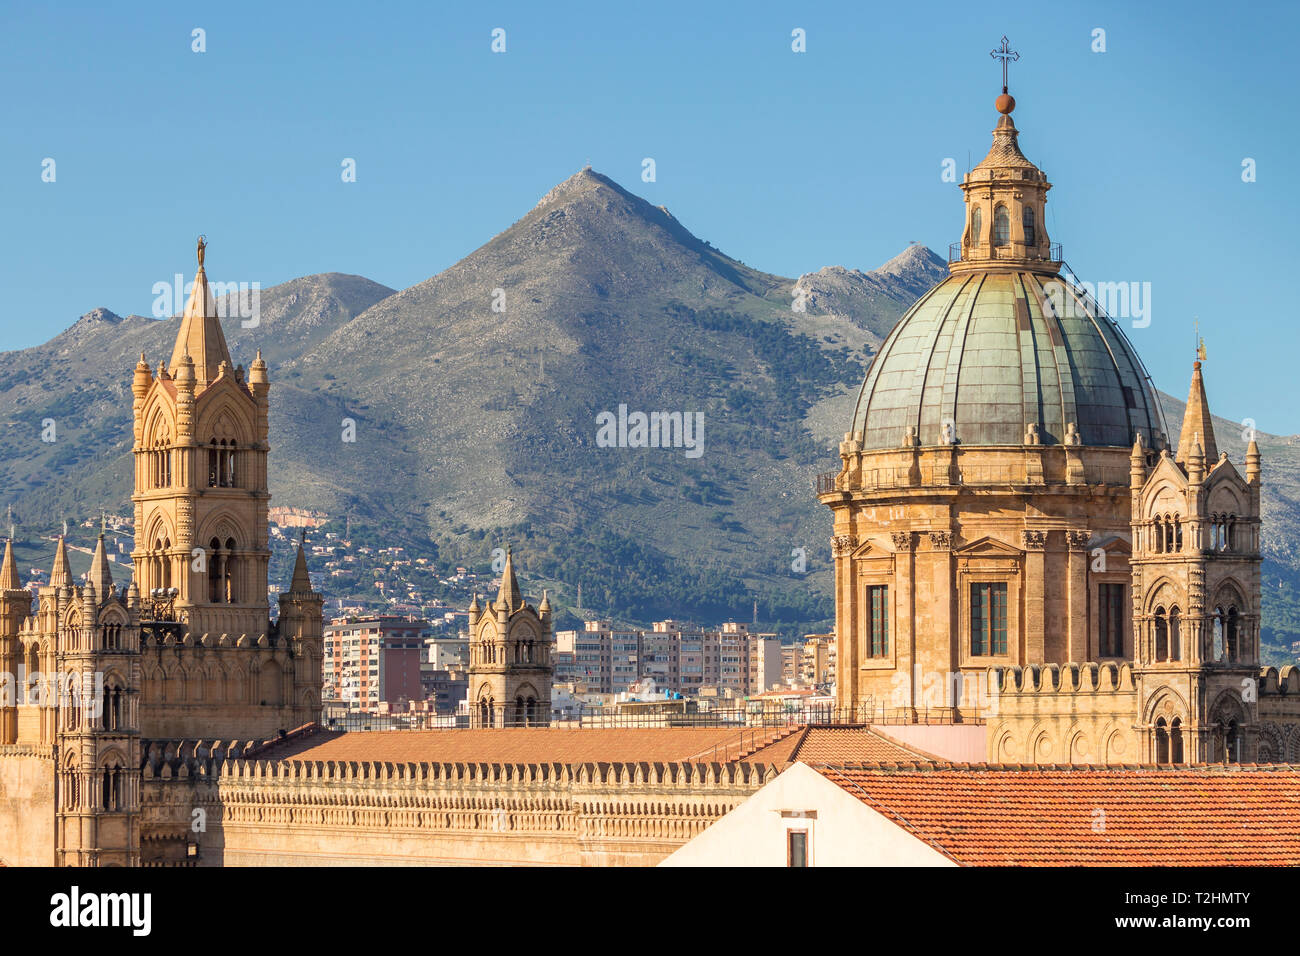 Cupola of the Palermo Cathedral (UNESCO World Heritage Site), Palermo, Sicily, Italy, Europe Stock Photo